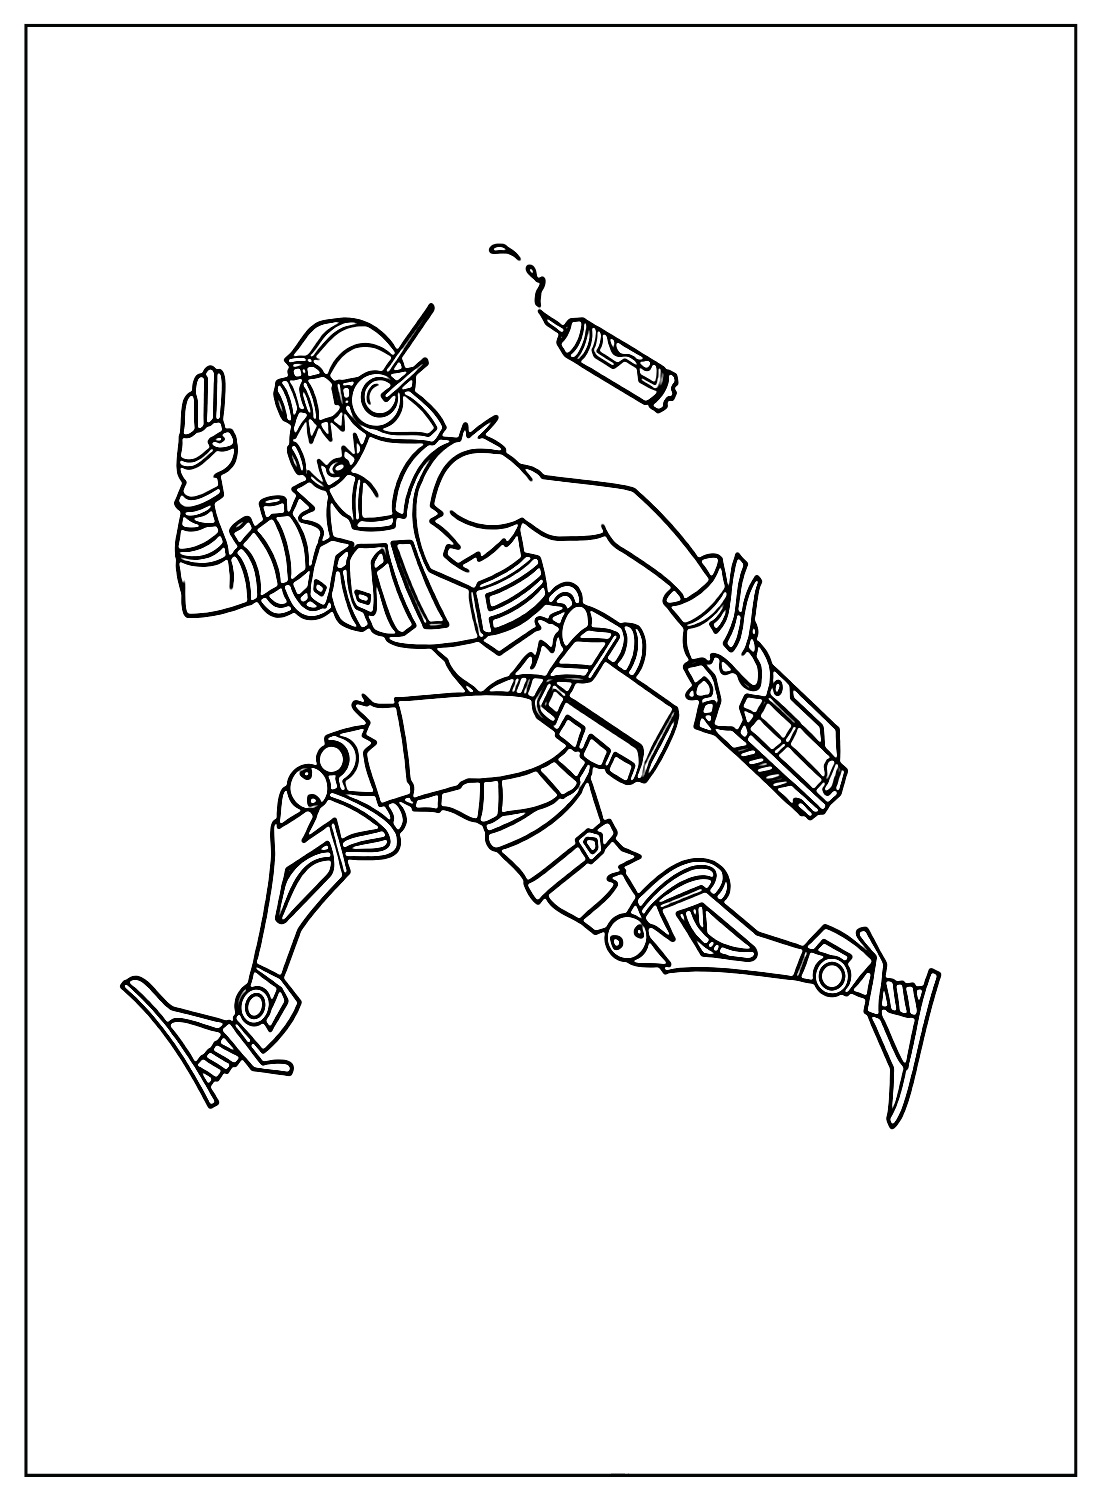 Apex Legends Octane Coloring Page from Apex Legends